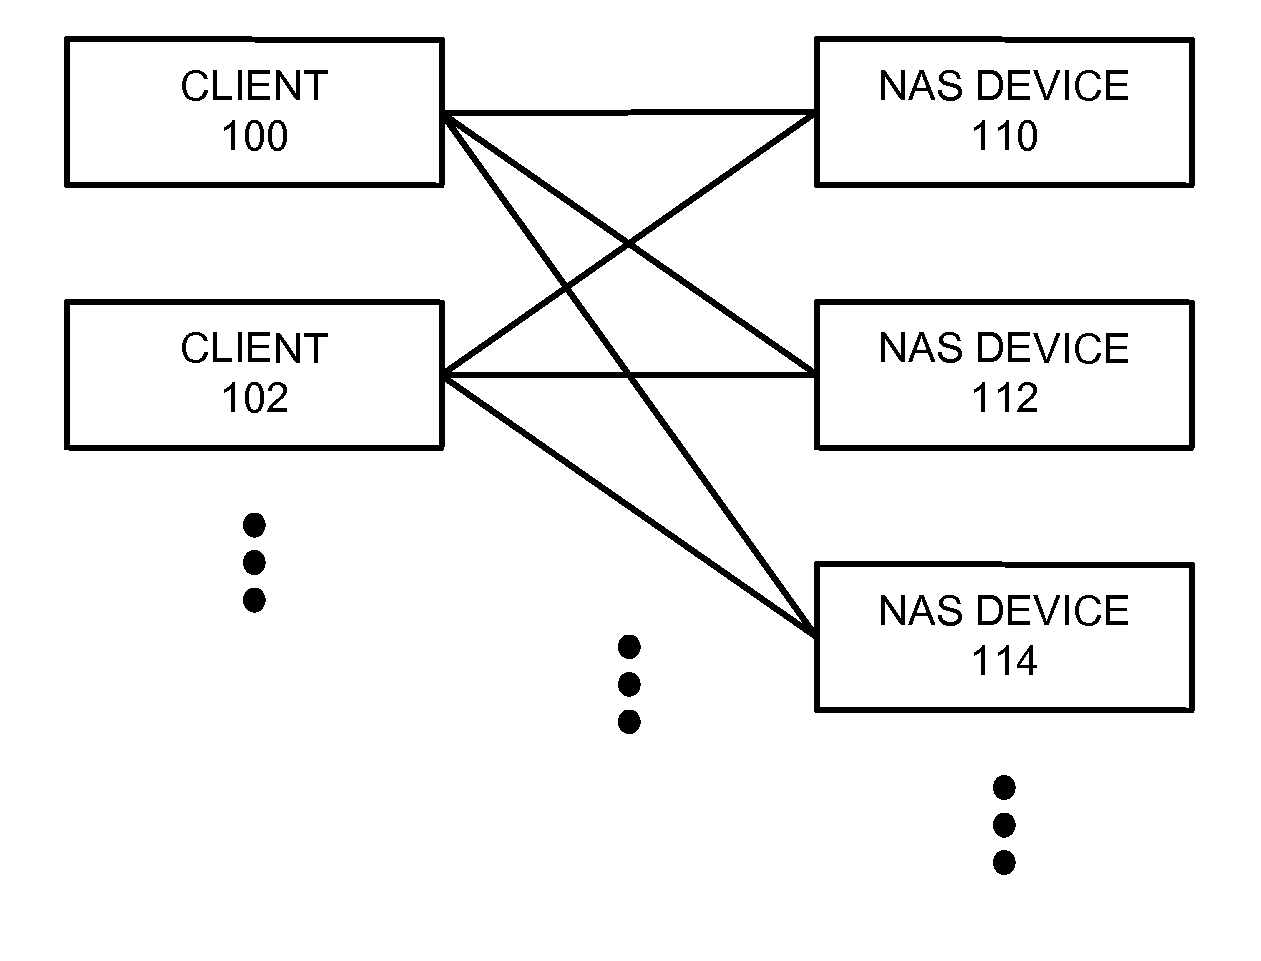 Synchronizing file updates between two cloud controllers of a distributed filesystem